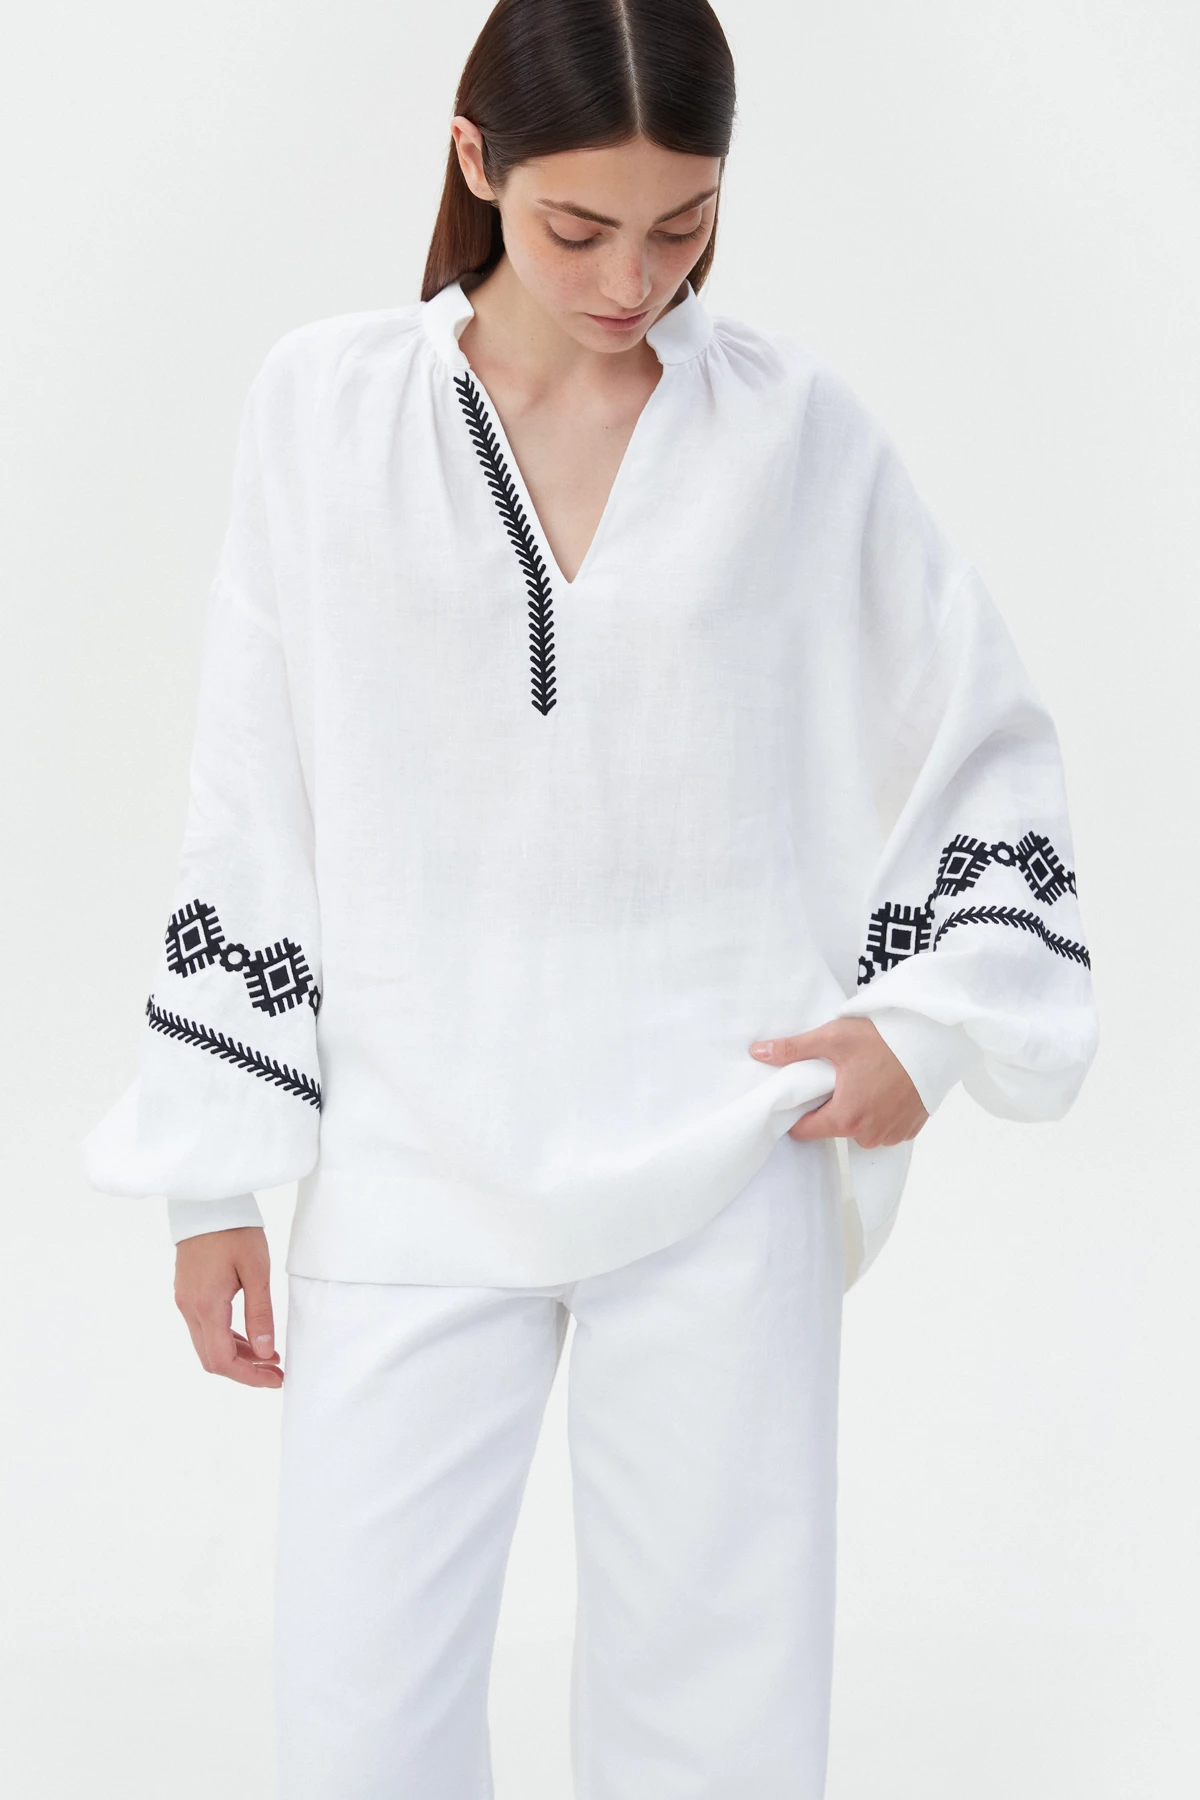 White linen vyshyvanka shirt with floral embroidery, photo 1